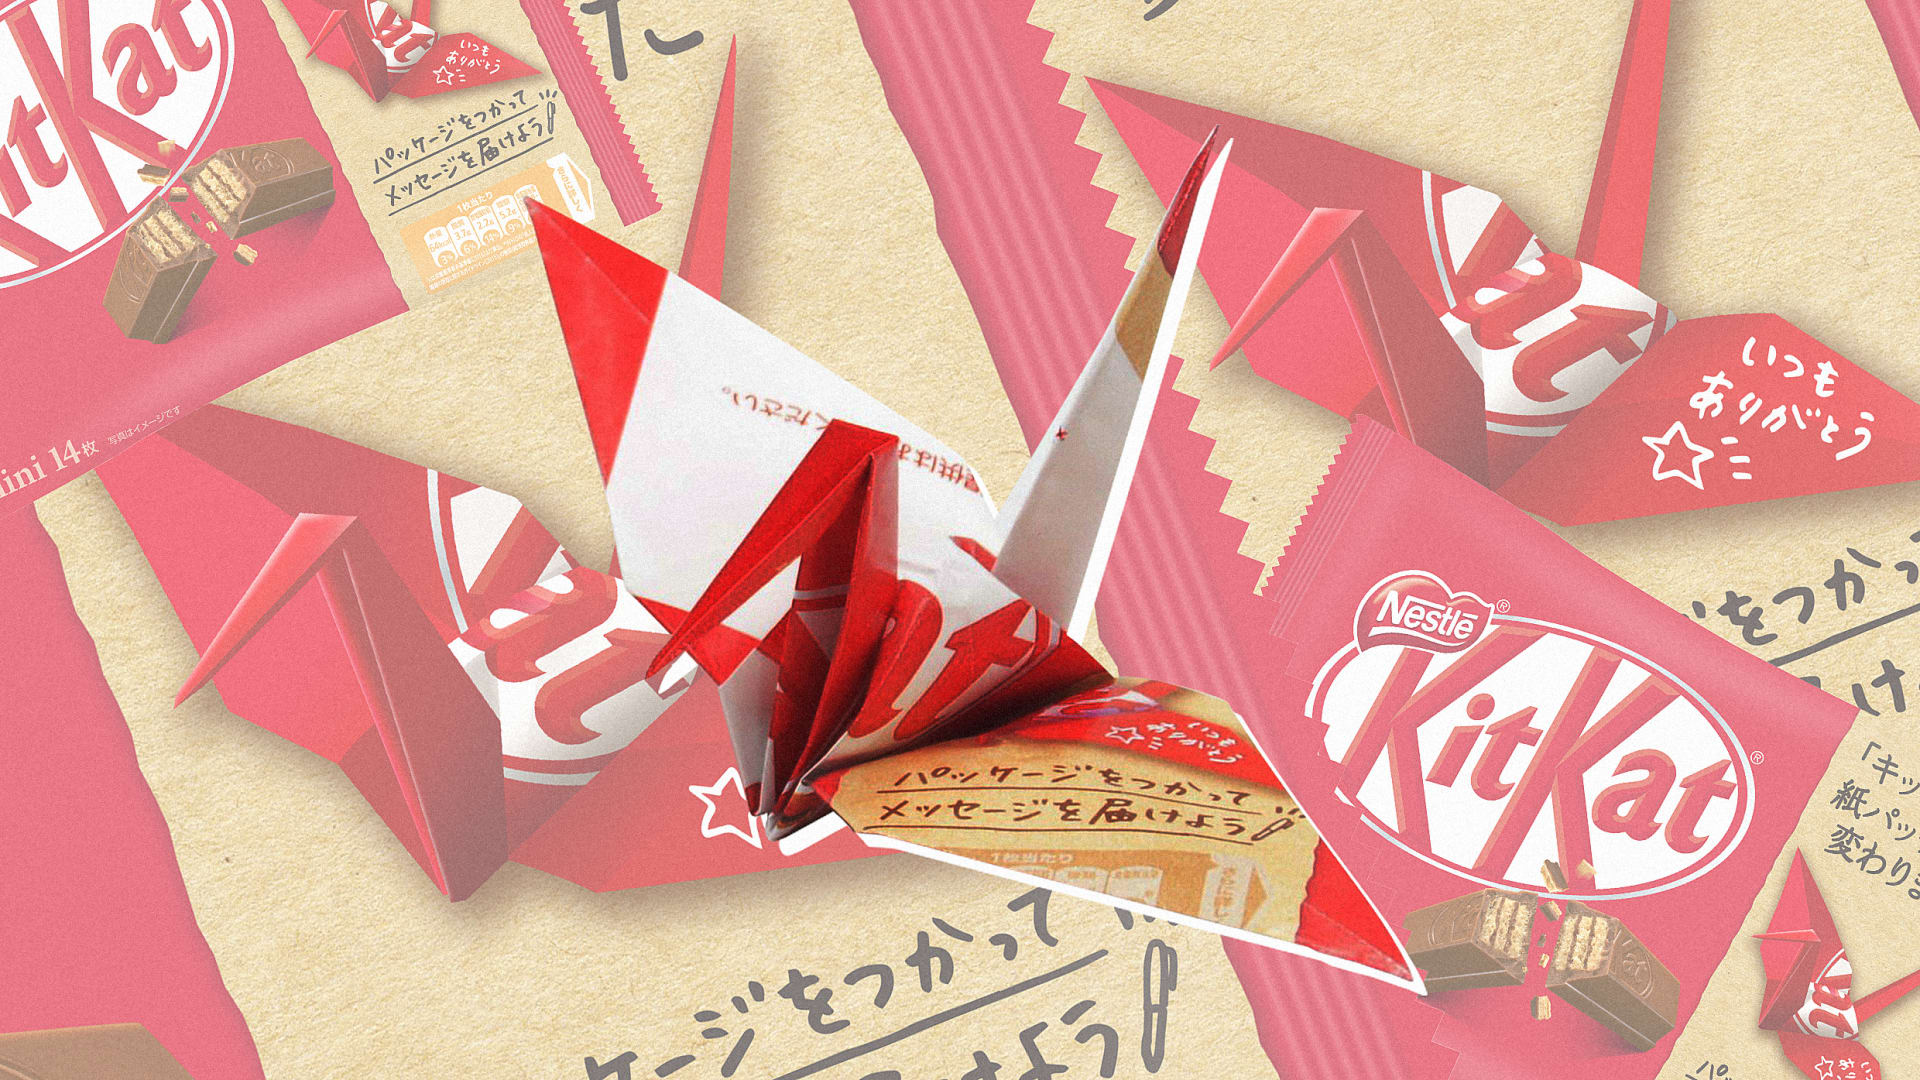 KitKat is ditching plastic packaging for paper you can turn into origami